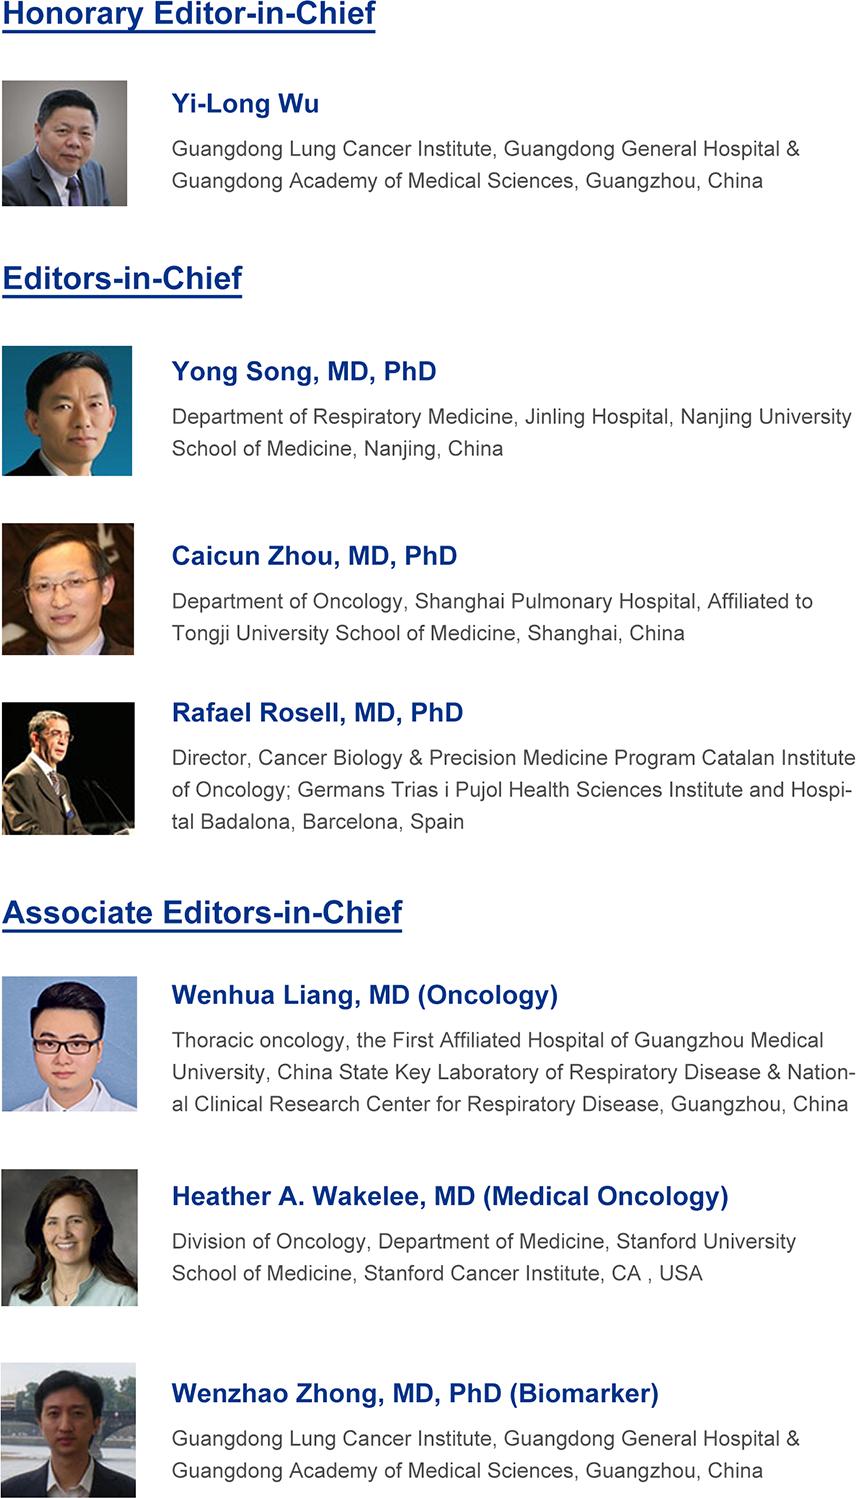 610 Editorial Office. Translational Lung Cancer Research, the 7th AME Journal indexed in SCIE Figure 2 The Honorary Editor-in-Chief, Editors-in-Chief, and Associate Editors-in-Chief of TLCR.